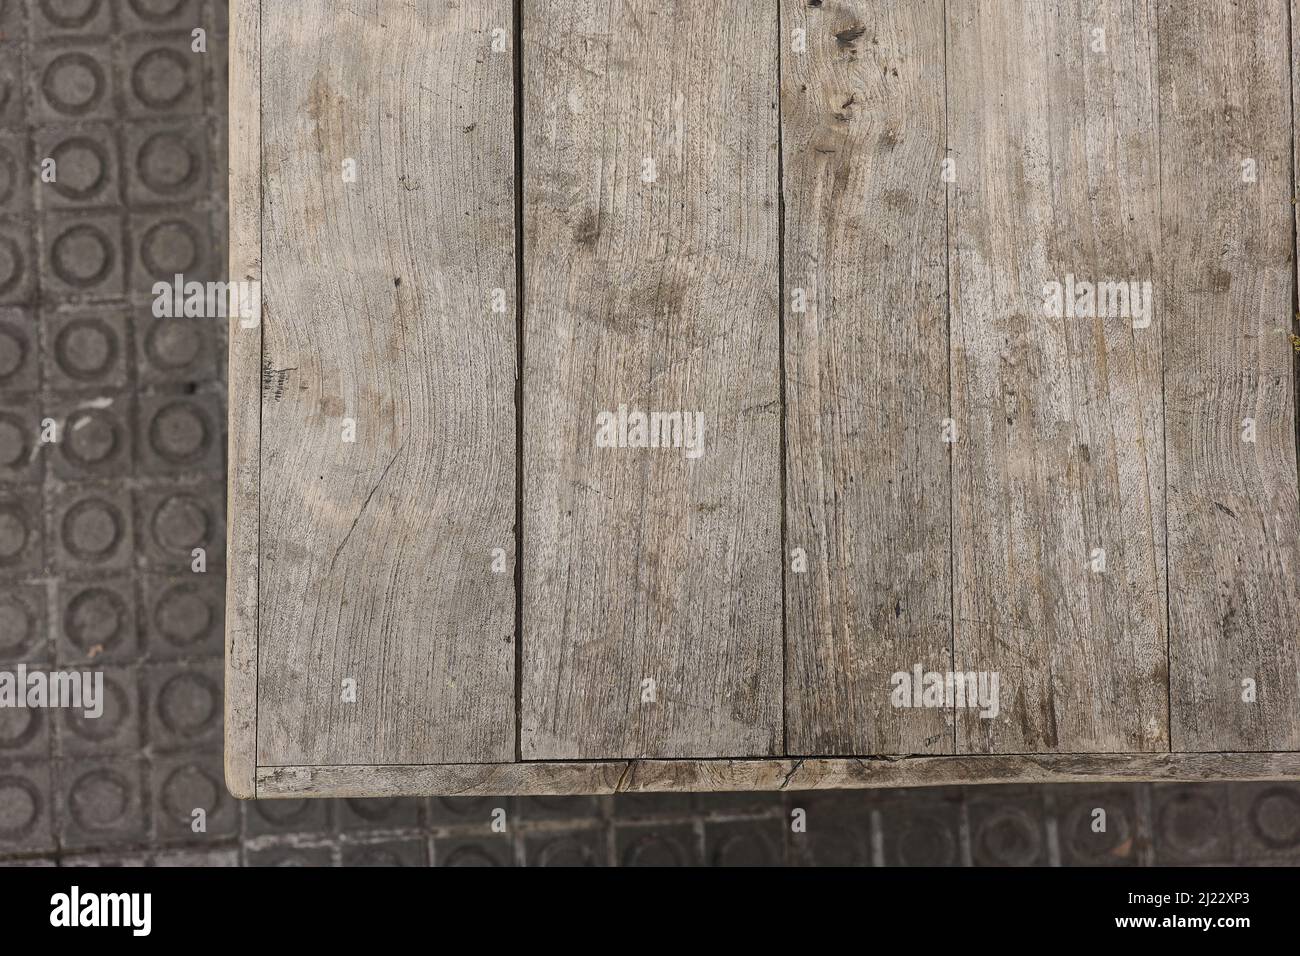 Aged wooden table surface. Stock Photo